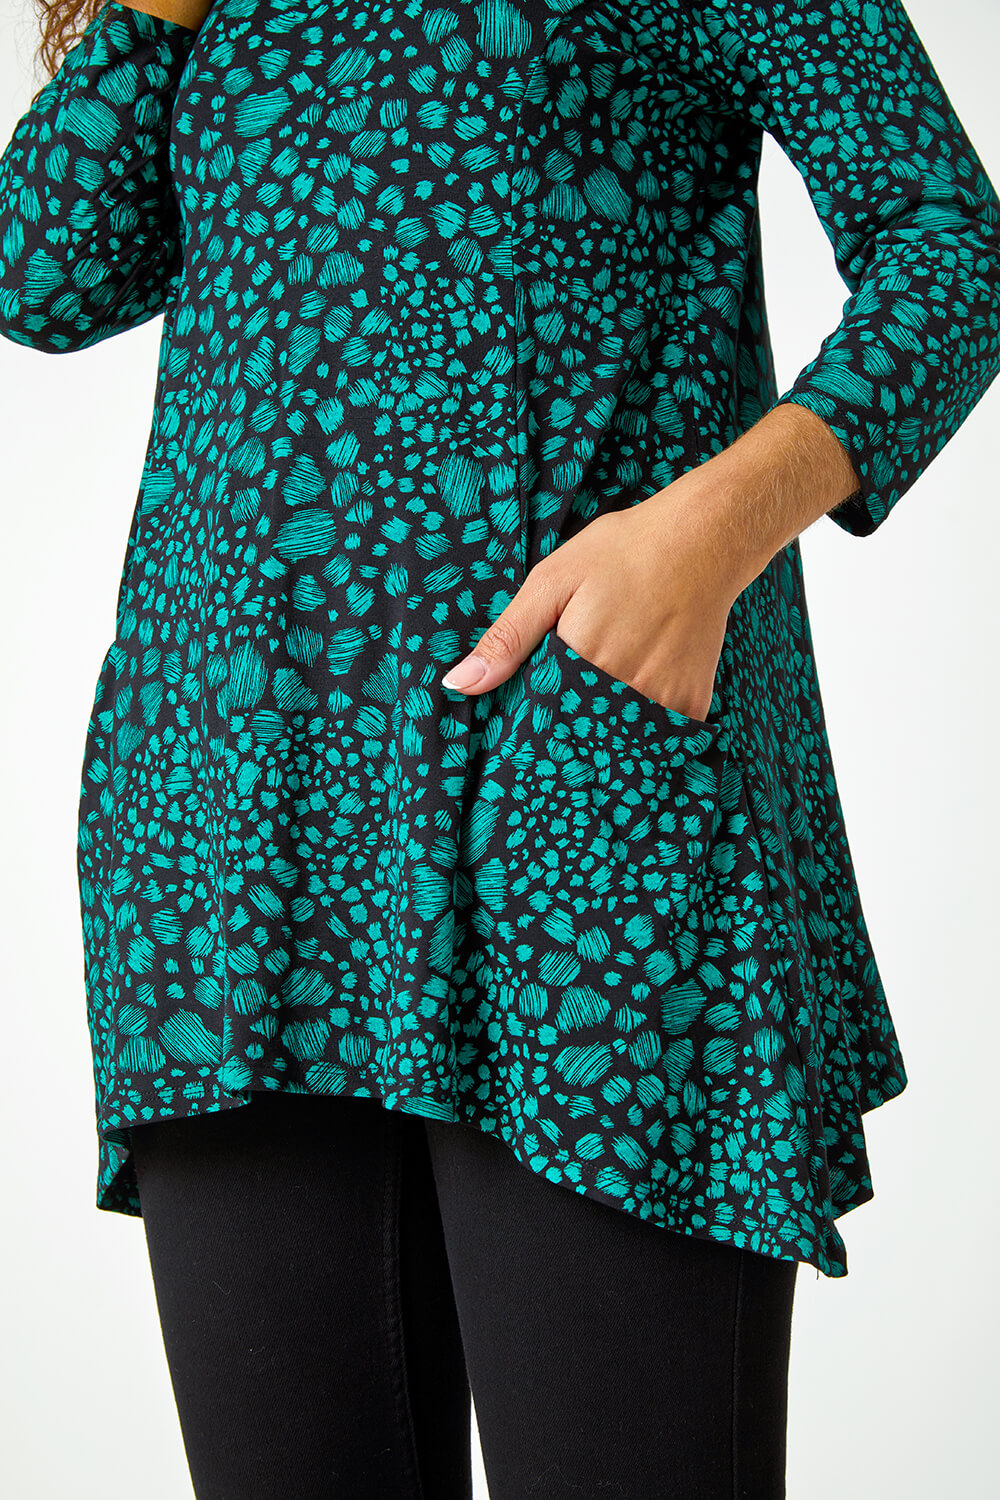 Green Spot Print Swing Stretch Top, Image 5 of 5